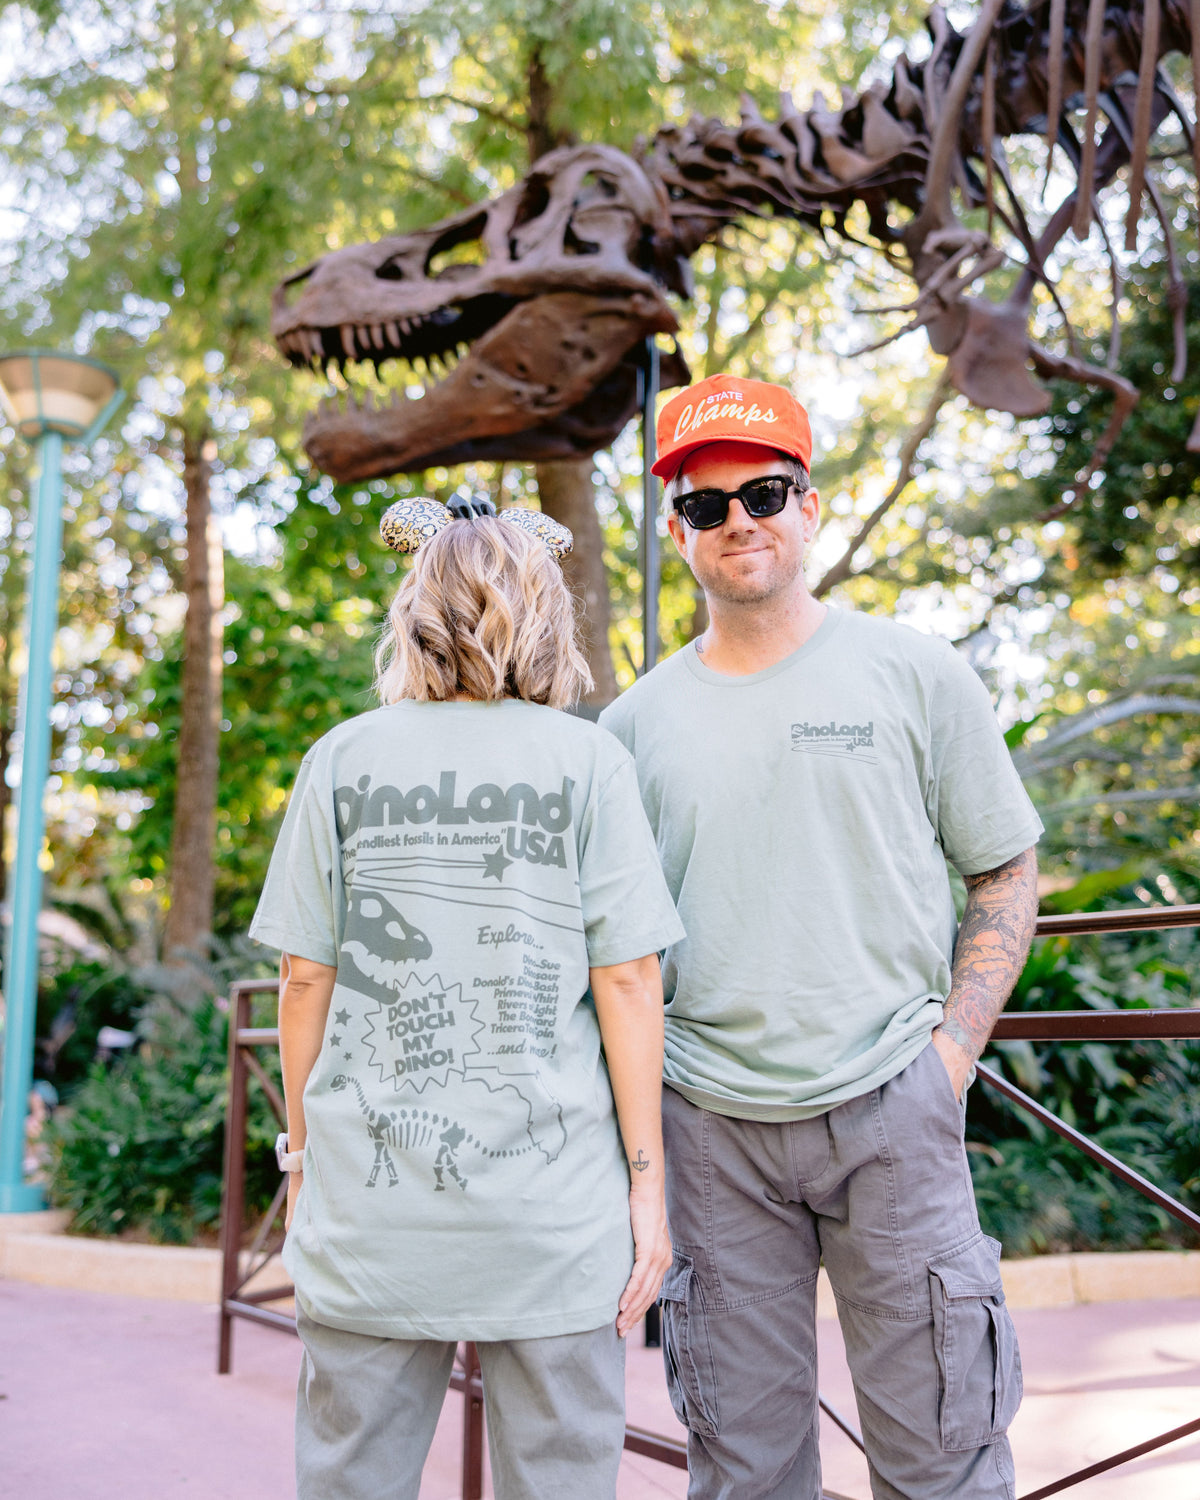 Don&#39;t Touch Our Dino Tee